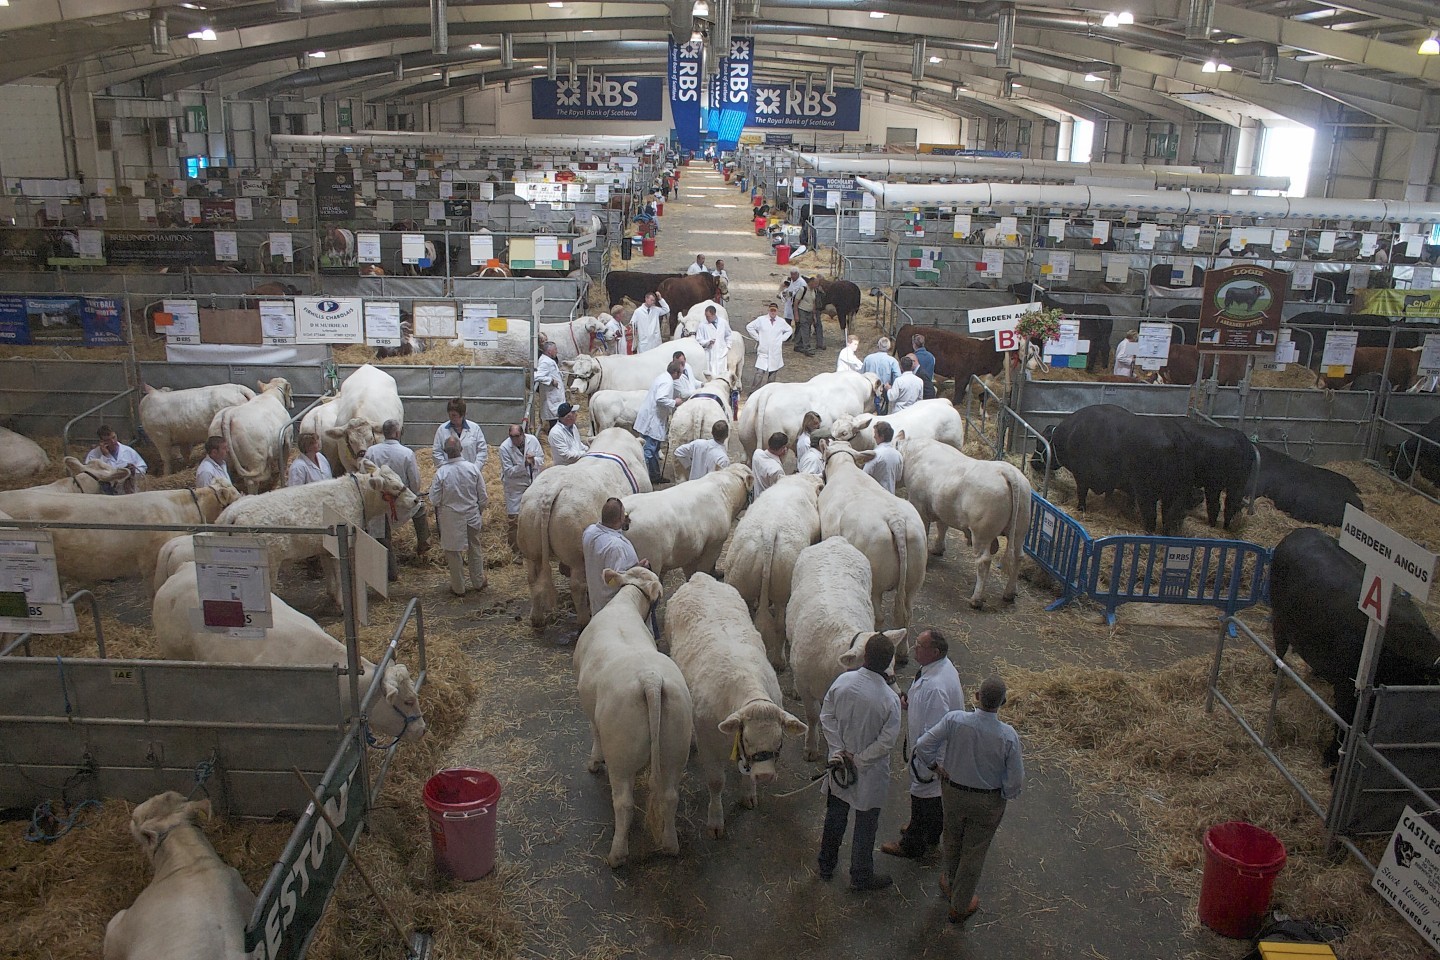 A packed livestock hall at the Royal Highland Show